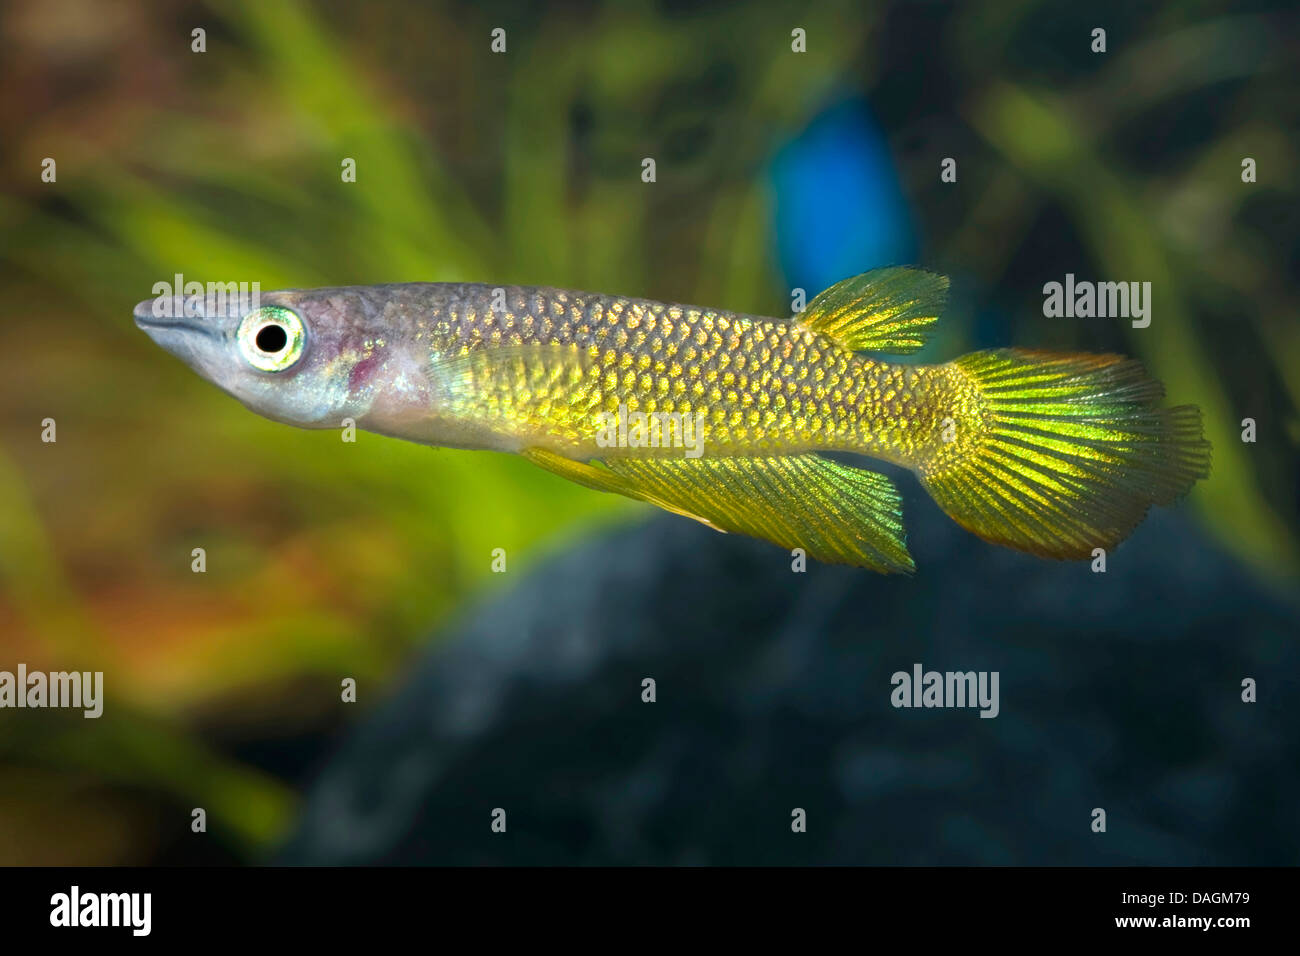 Golden Striped Panchax (Aplocheilus lineatus Gold), swimming Stock Photo